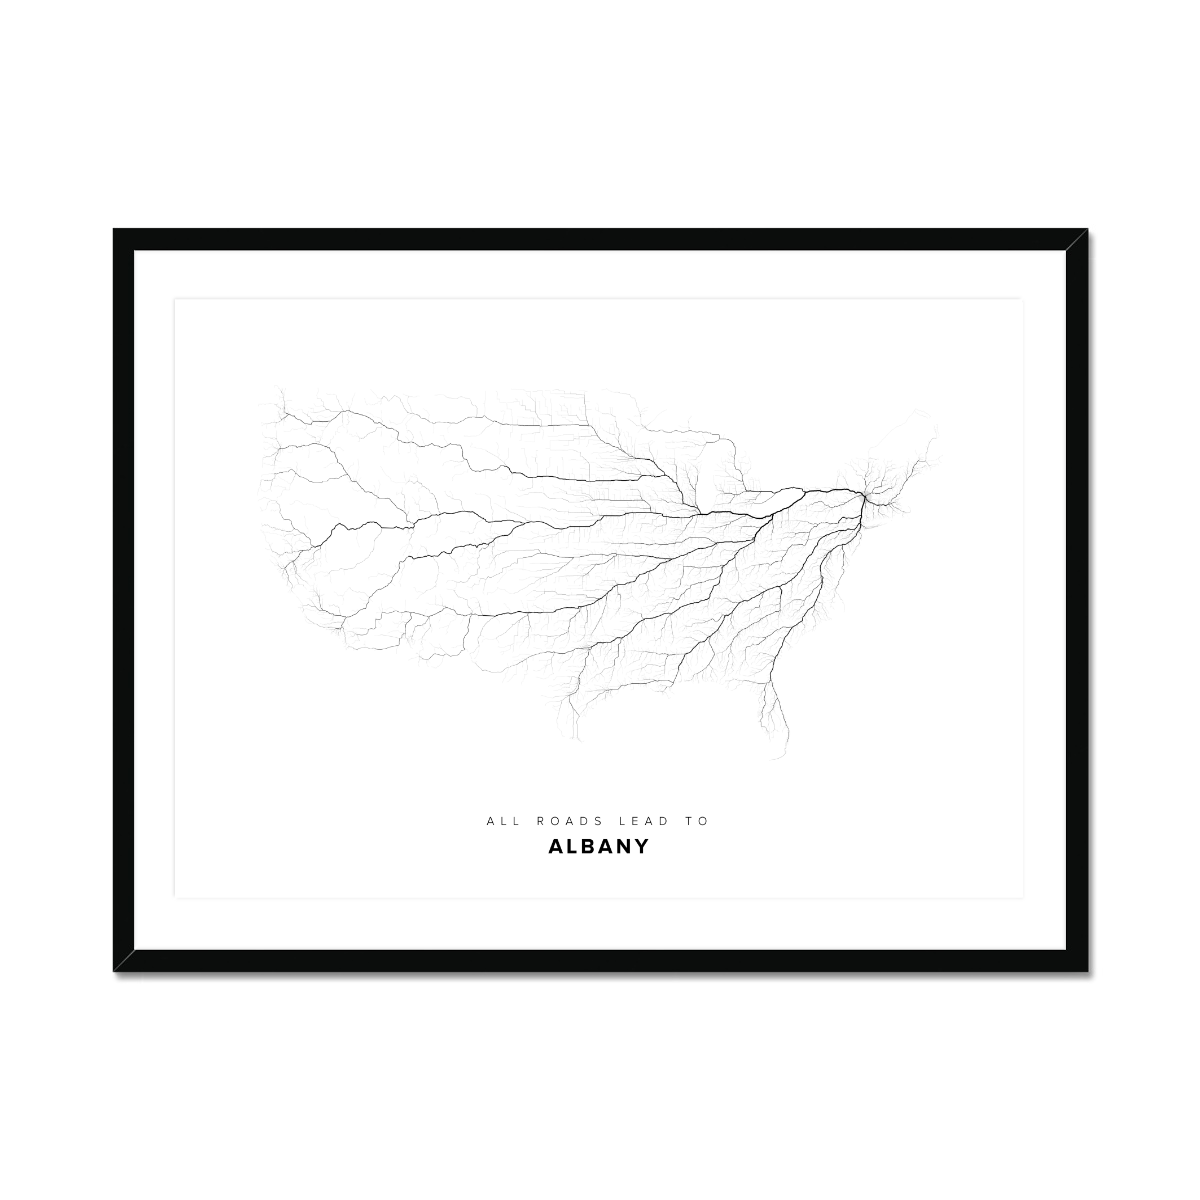 All roads lead to Albany (United States of America) Fine Art Map Print